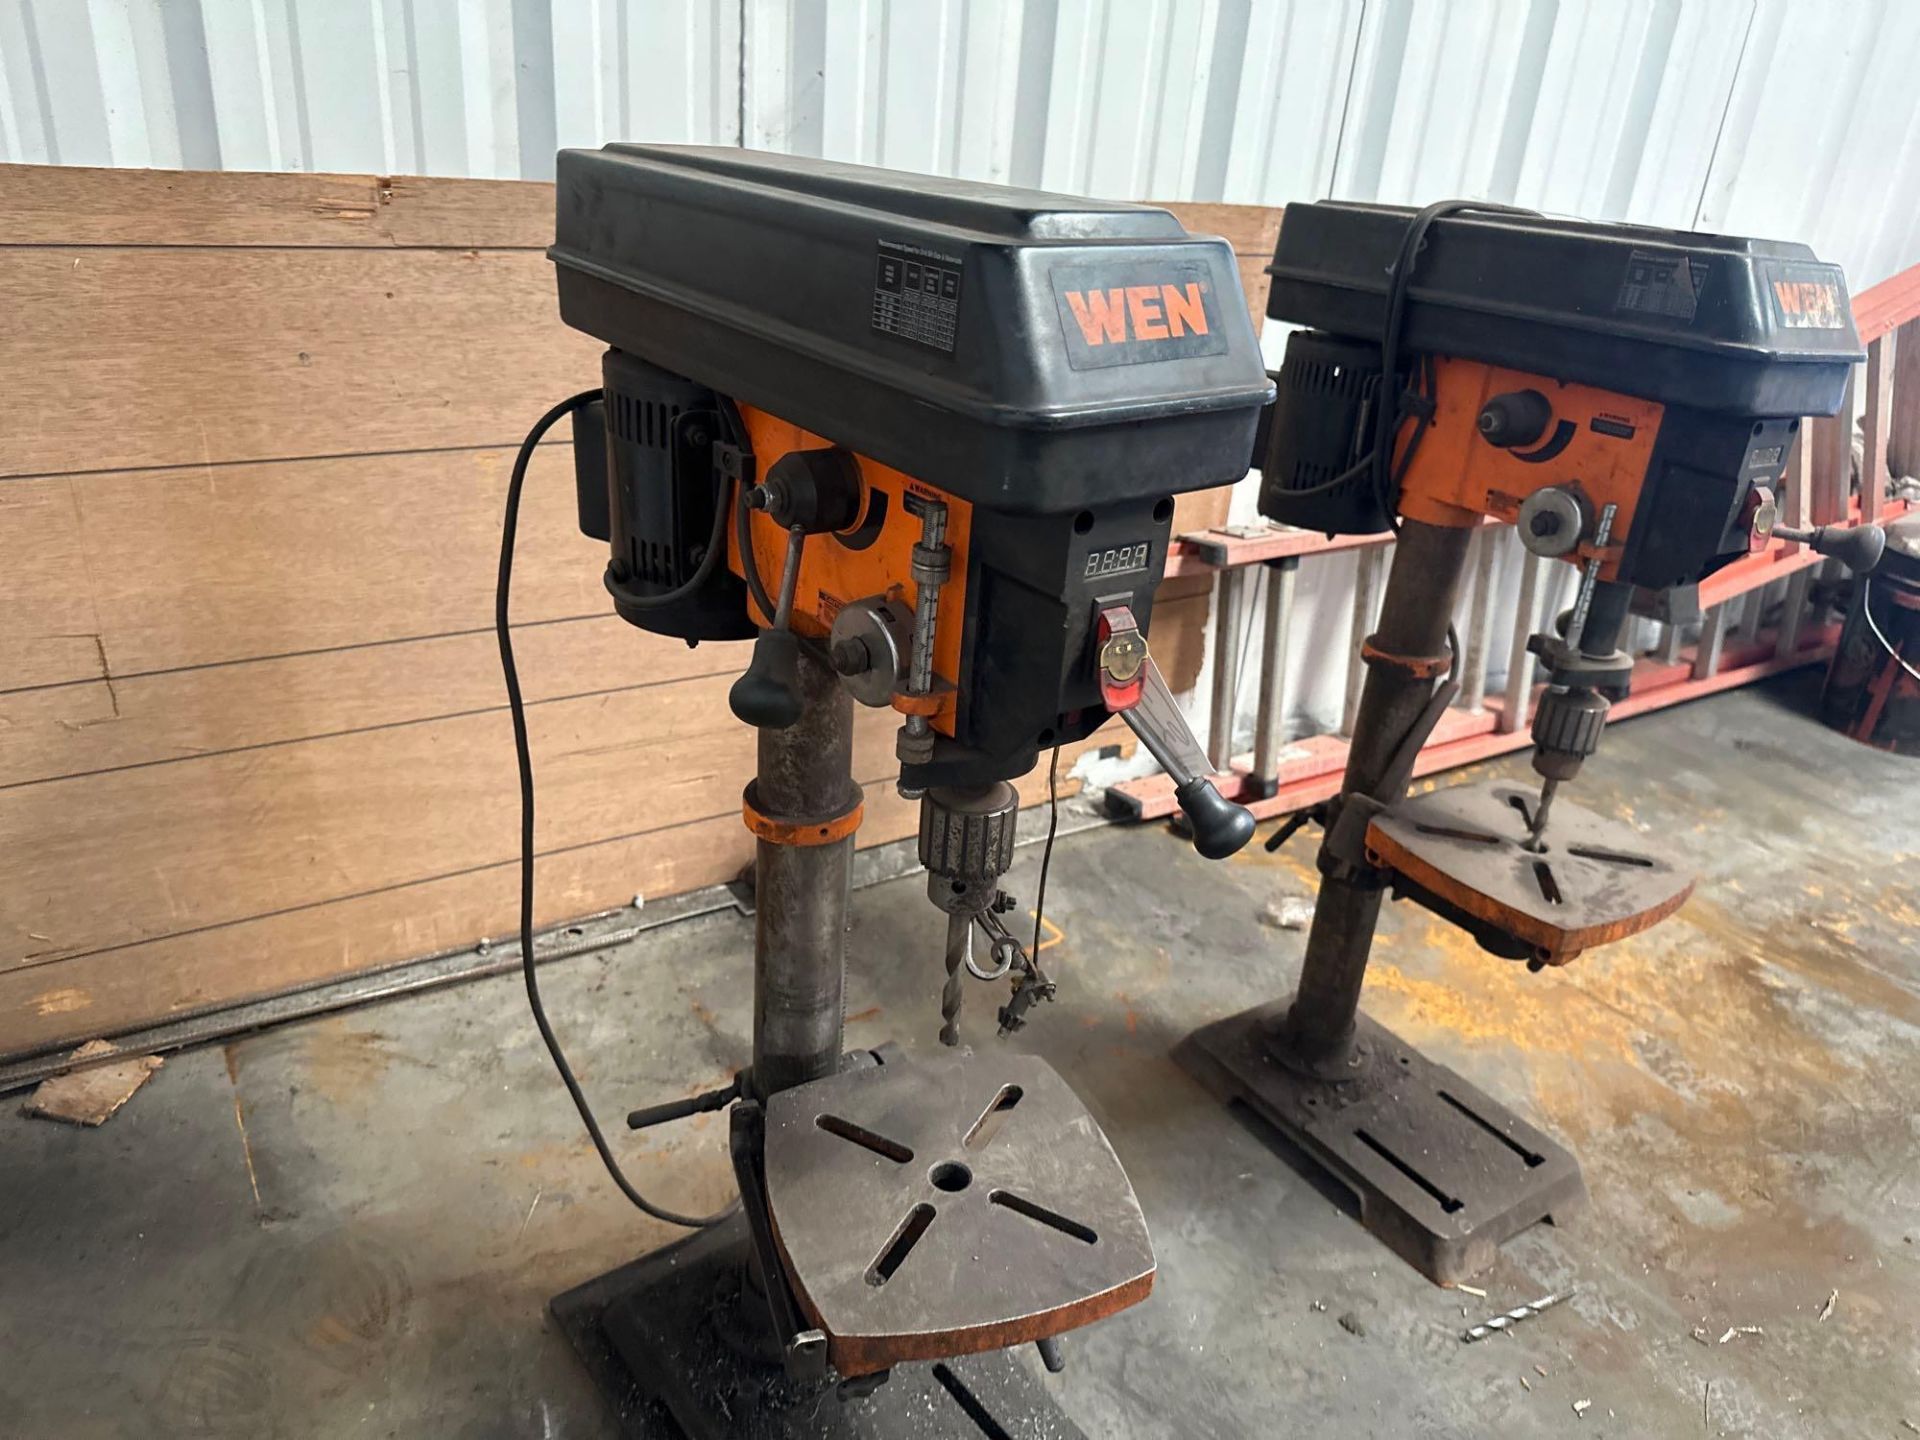 WEN 12” Variable Speed Bench Drill Press, s/n GLT1708AW11809 *Located in Redlands, CA* - Image 2 of 7